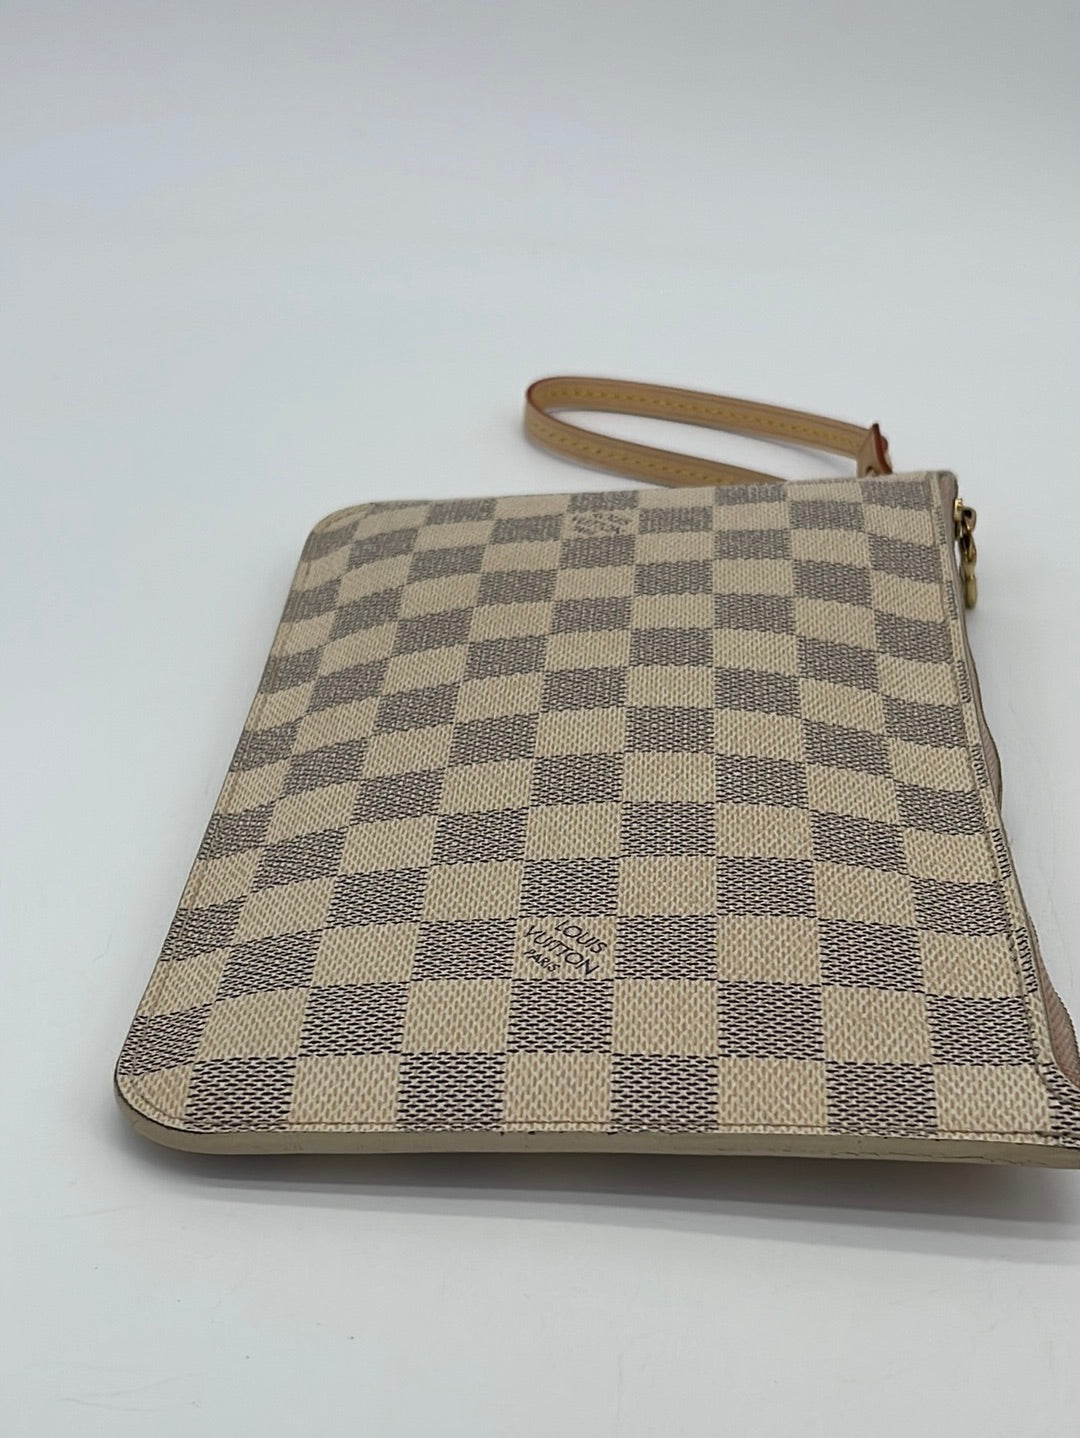 Preloved Louis Vuitton Damier Azur Neverfull Large Pouch SD2107 082323 –  KimmieBBags LLC